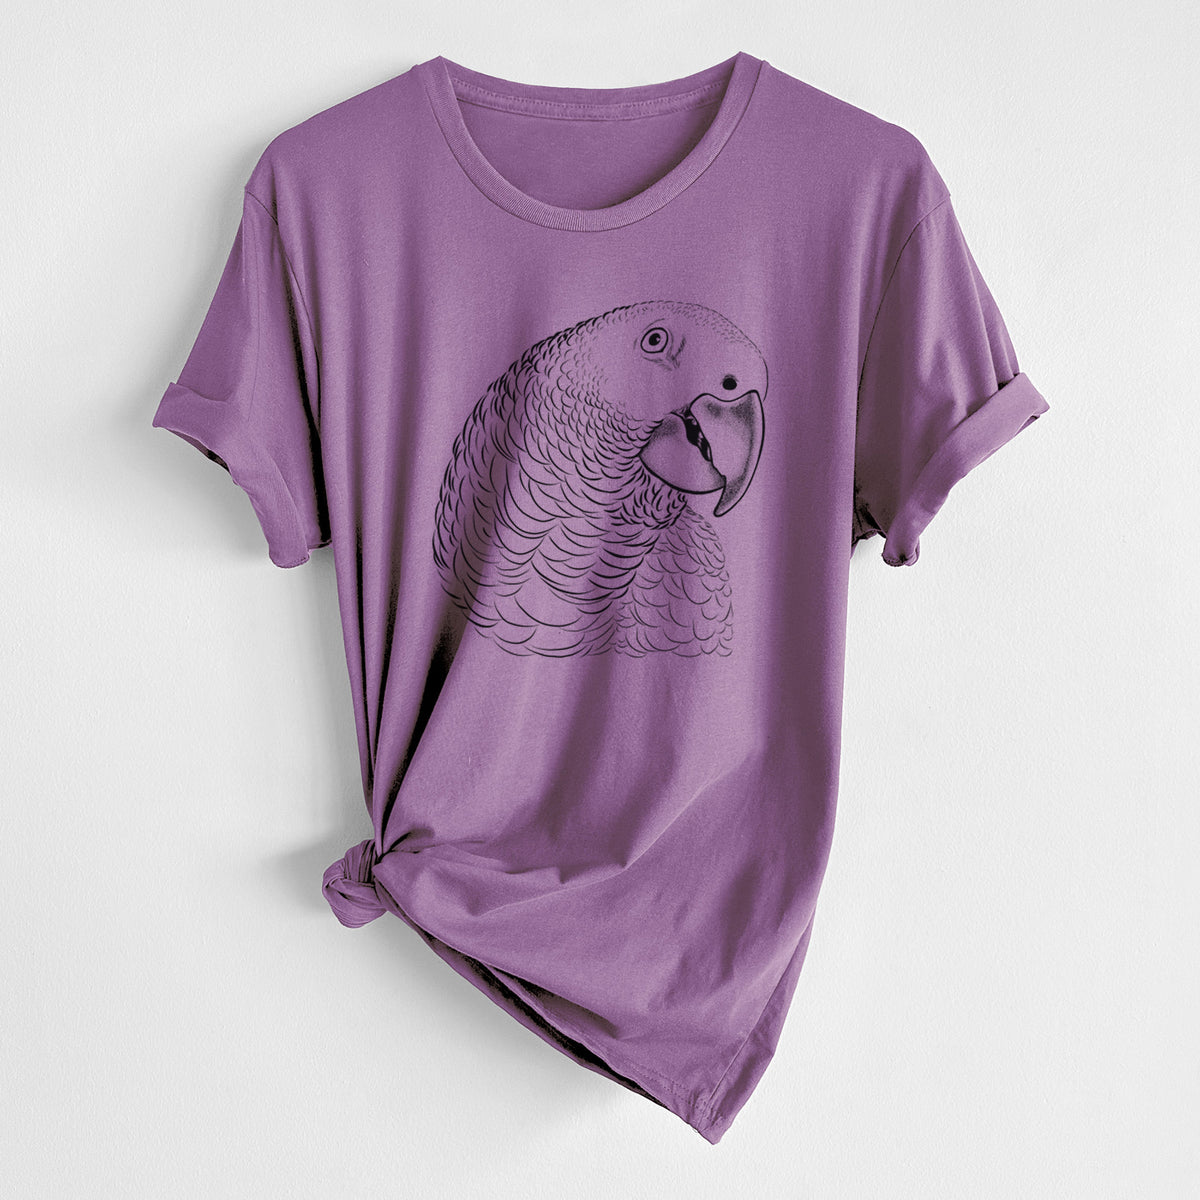 African Grey Parrot - Unisex Crewneck - Made in USA - 100% Organic Cotton